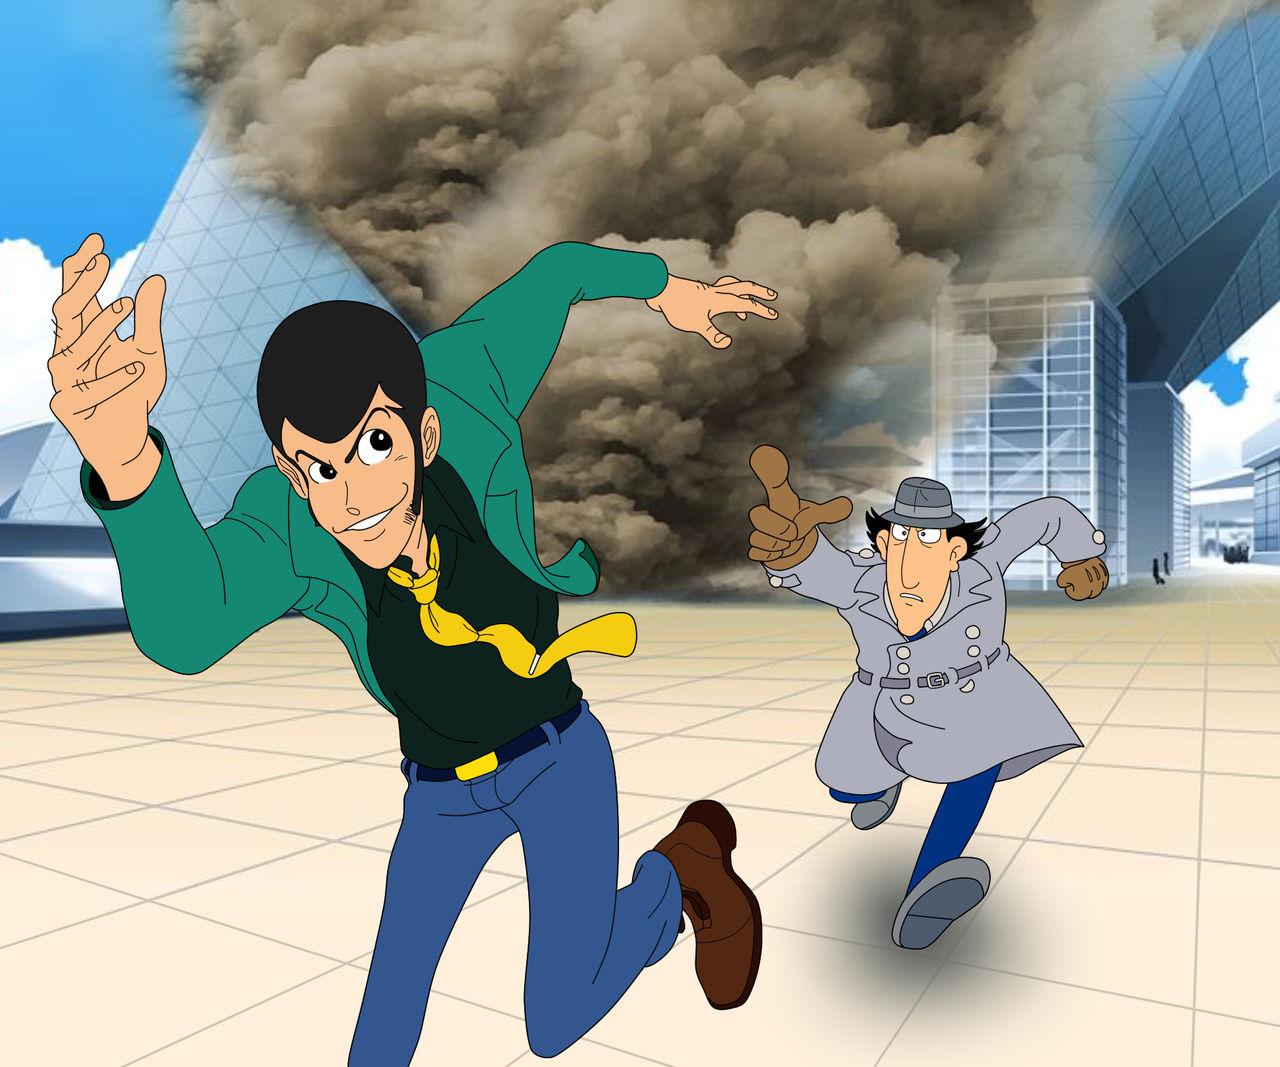 [Image: lupin_the_third_vs__inspector_gadget_by_...nygMykmzqU]